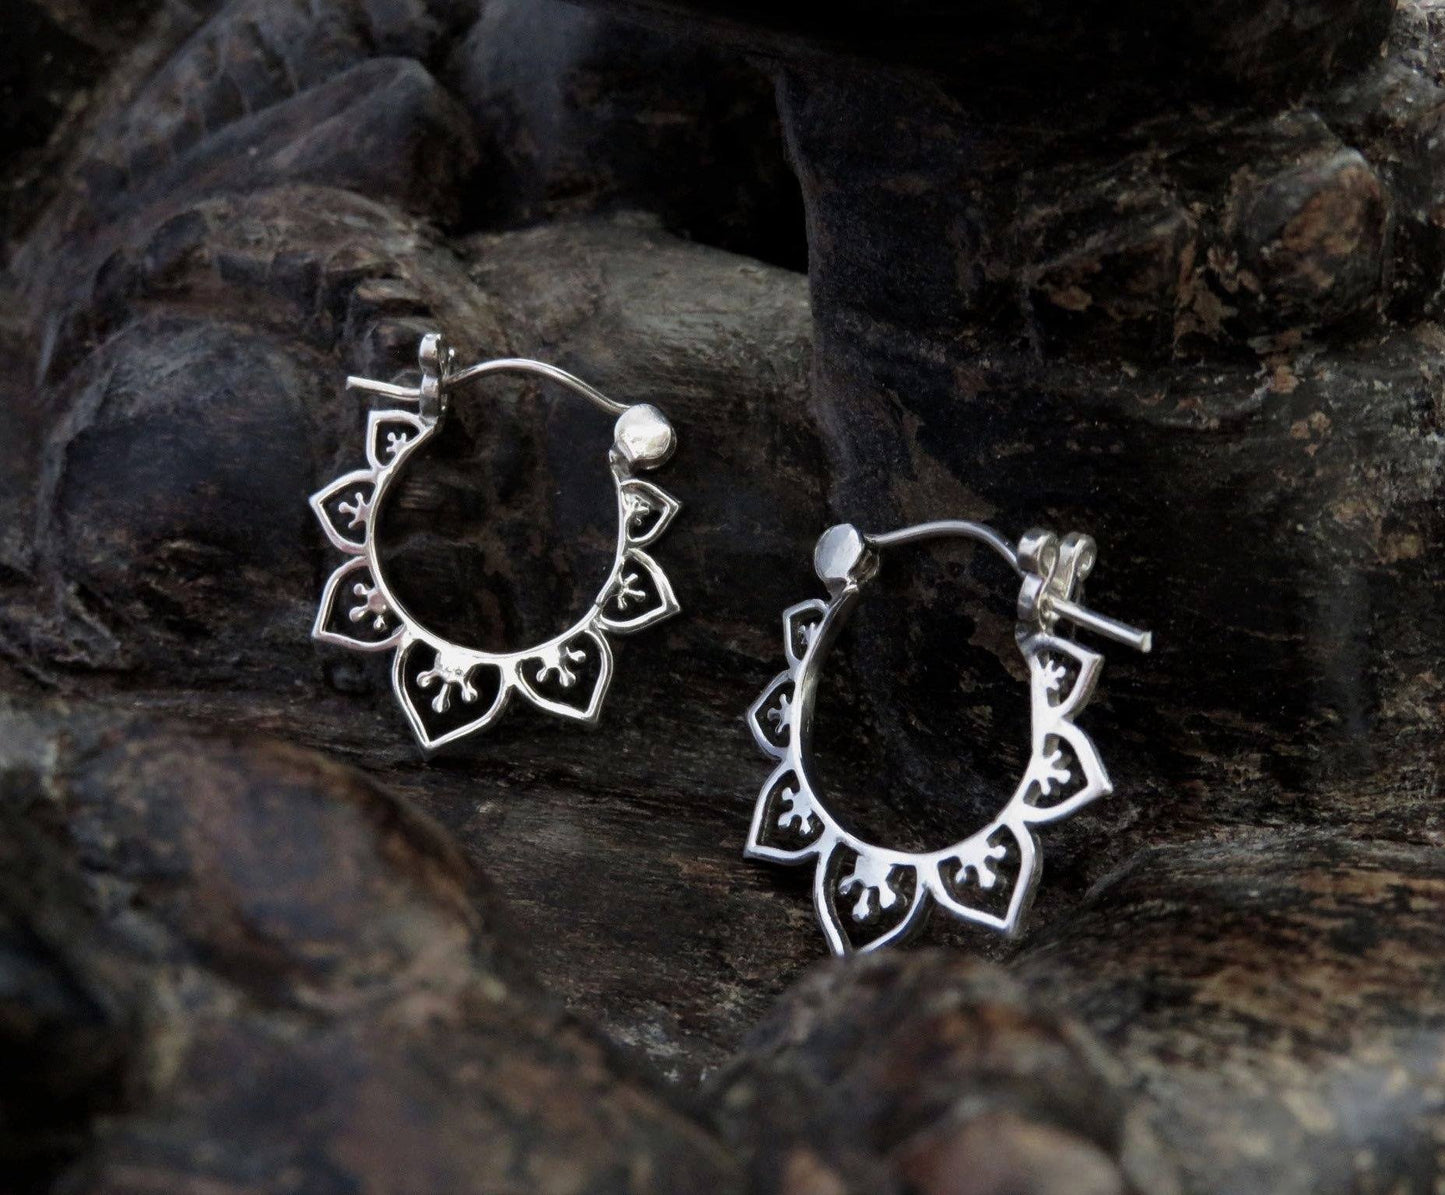 small hoop earrings with flower pattern made of silver